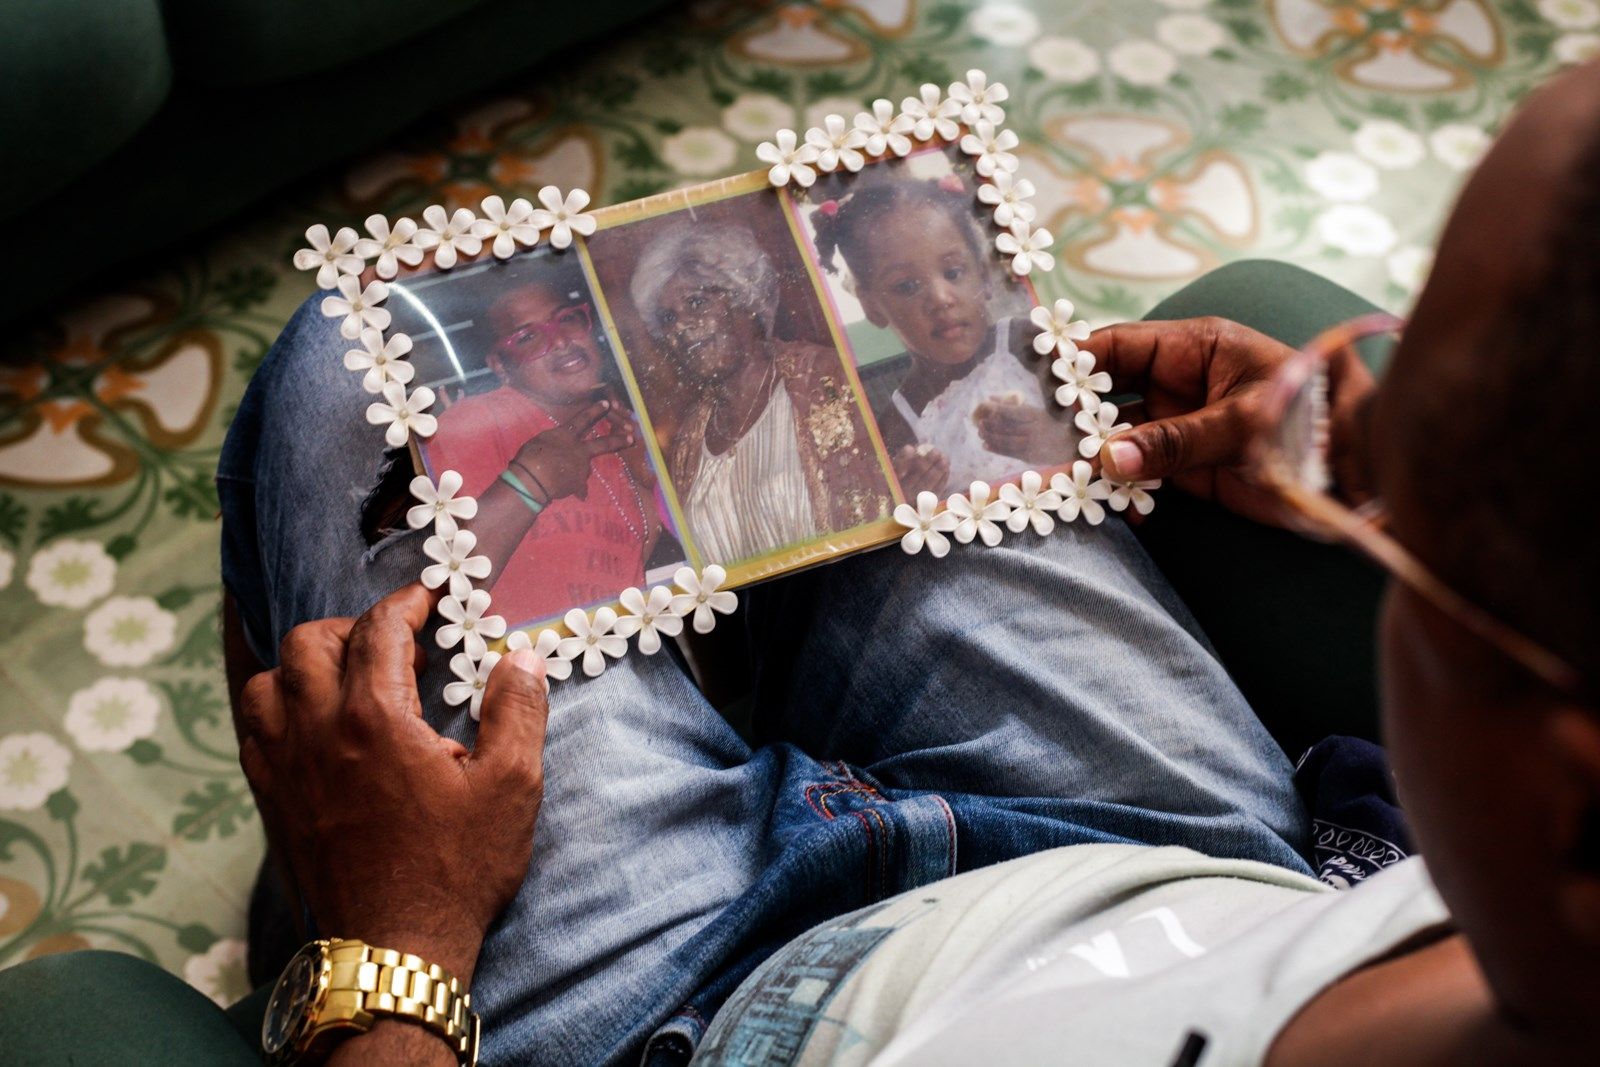 Jorge Álvarez holds a photo of three of four people killed in a 2015 building collapse. From left, his nephew Jorge Álvarez, 18; his mother, Mayra Páez, 60; and his daughter Genolan Álvarez, 3. Jorge’s girlfriend, Yaima Kindelán, 18, also died in the incident. Image by Tracey Eaton. Cuba, 2018.